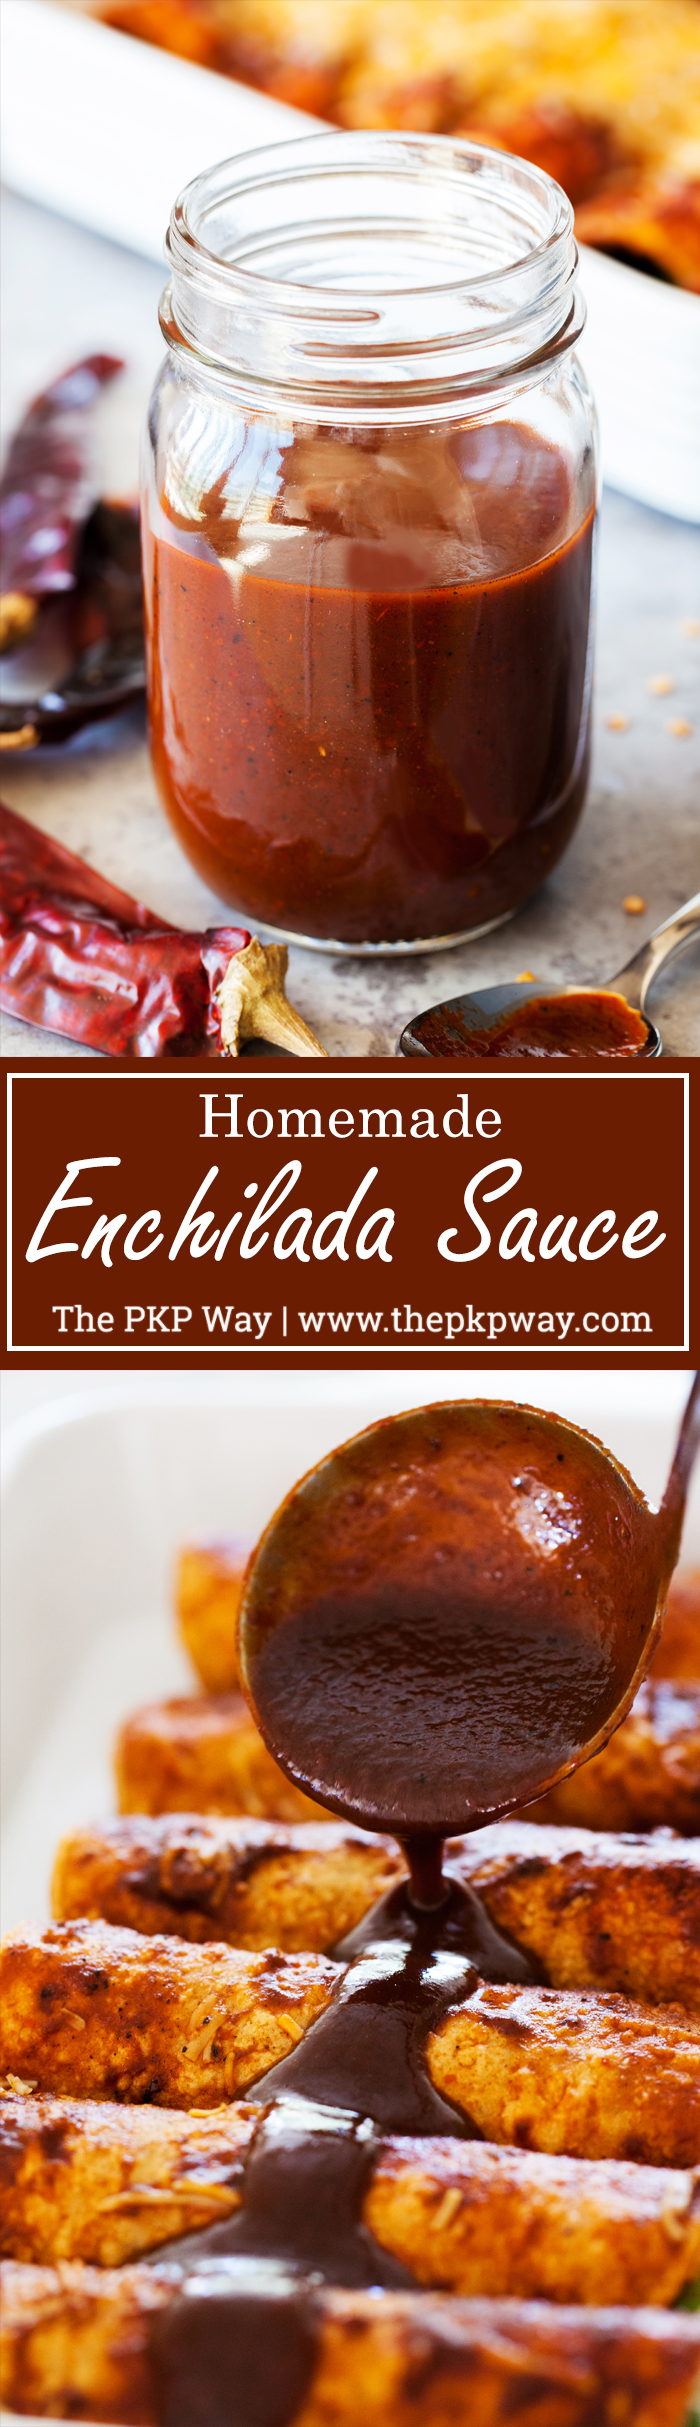 Homemade Red Enchilada Sauce | The PKP Way